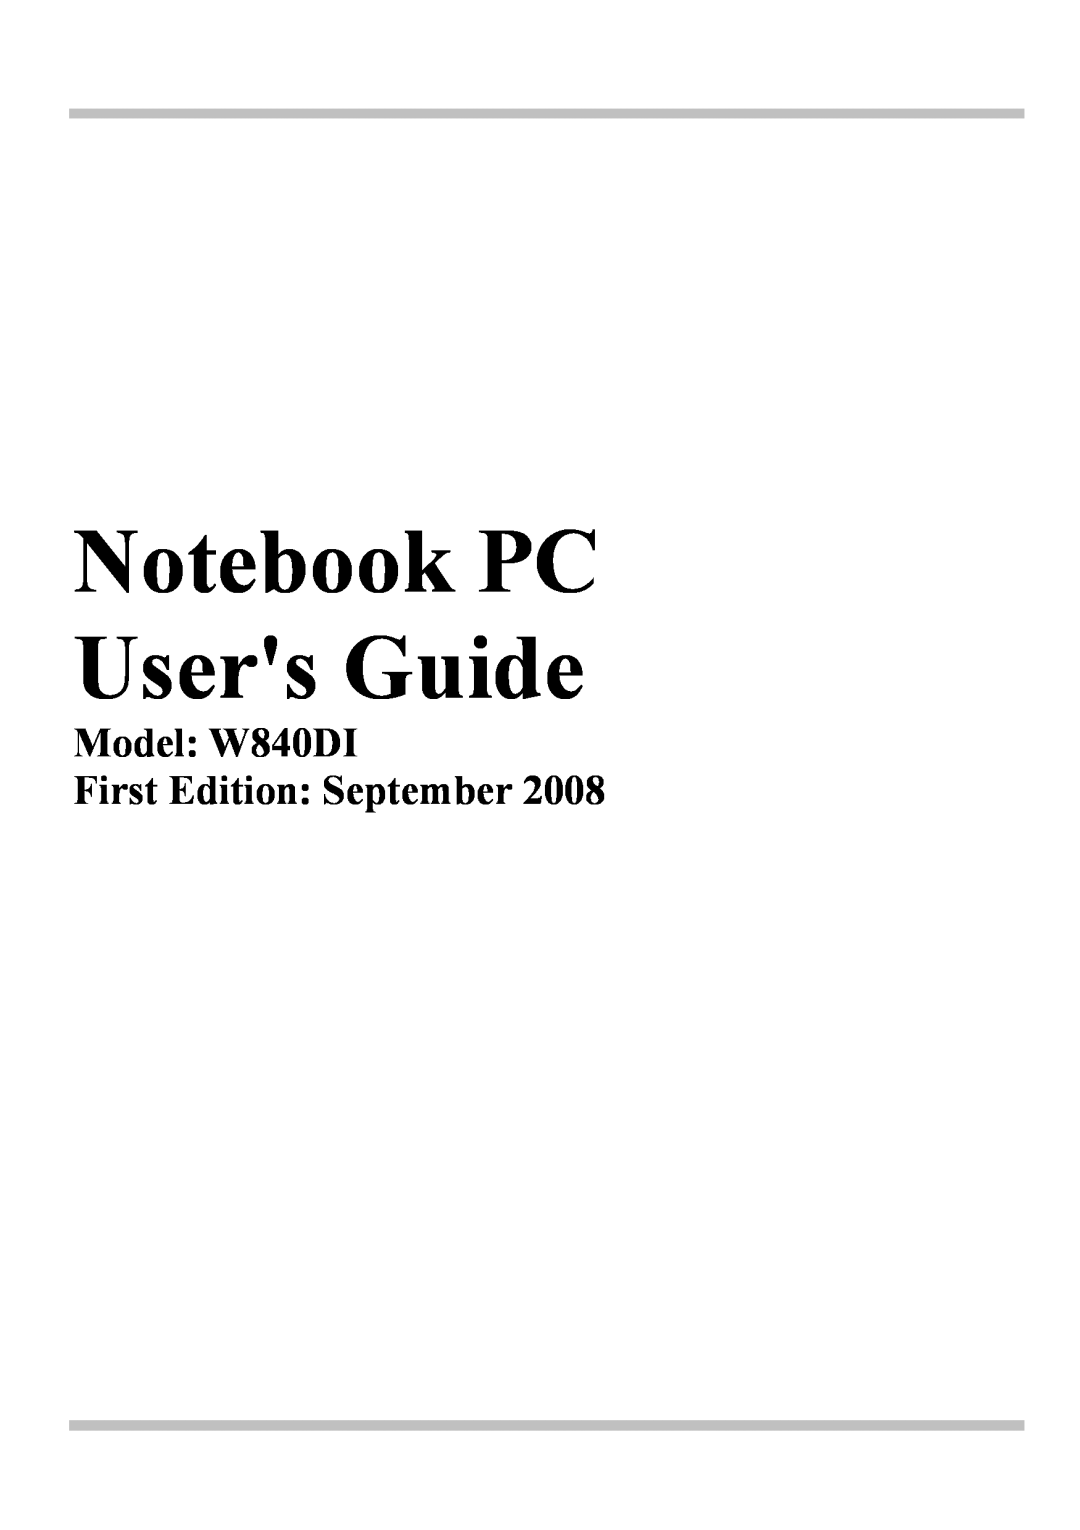 Microsoft manual Notebook PC Users Guide, Model W840DI First Edition September 